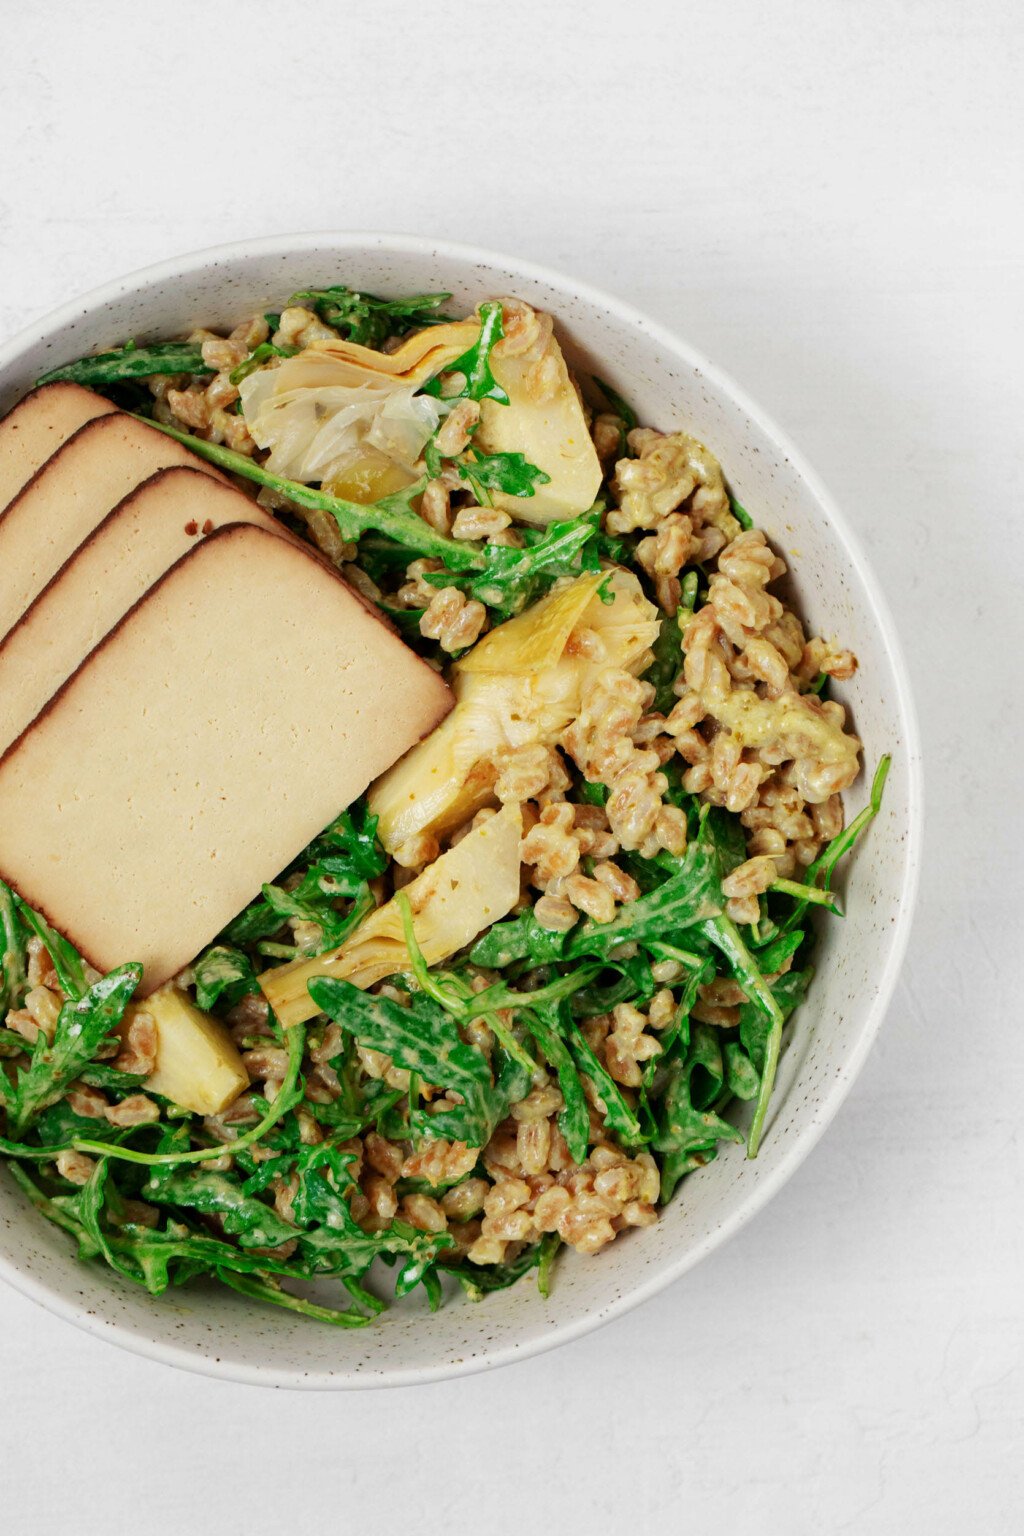 A close up image of a round, white bowl, which is filled with farro, kale, artichokes, and tofu. The farro is dressed with herby pesto.